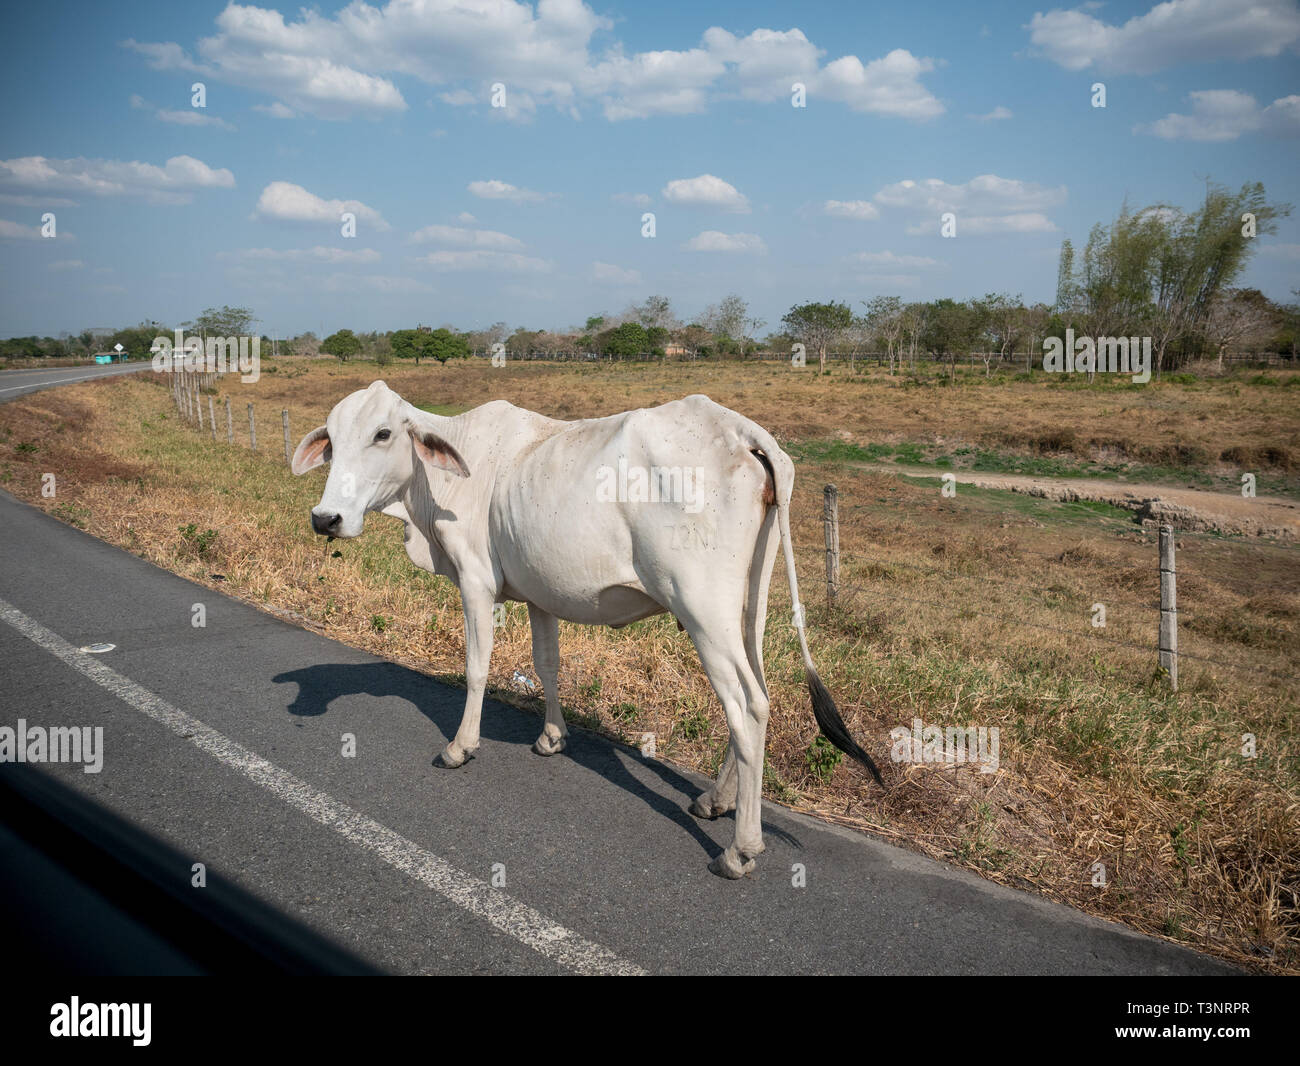 February 8, 2019 - Finca El ParaÃ-So/Yopal, Casanare, Colombia - A cow seen walking on the road.Colombian cowboys taking care of the cows in the region of Casanare, eastern Colombia, between the Ands, the Orinoco River and the border with Venezuela. These are Plains and pastures with wide rivers and marshes, a region of big biodiversity. But nowadays, it is in danger because of climate change. Credit: Jana Cavojska/SOPA Images/ZUMA Wire/Alamy Live News Stock Photo